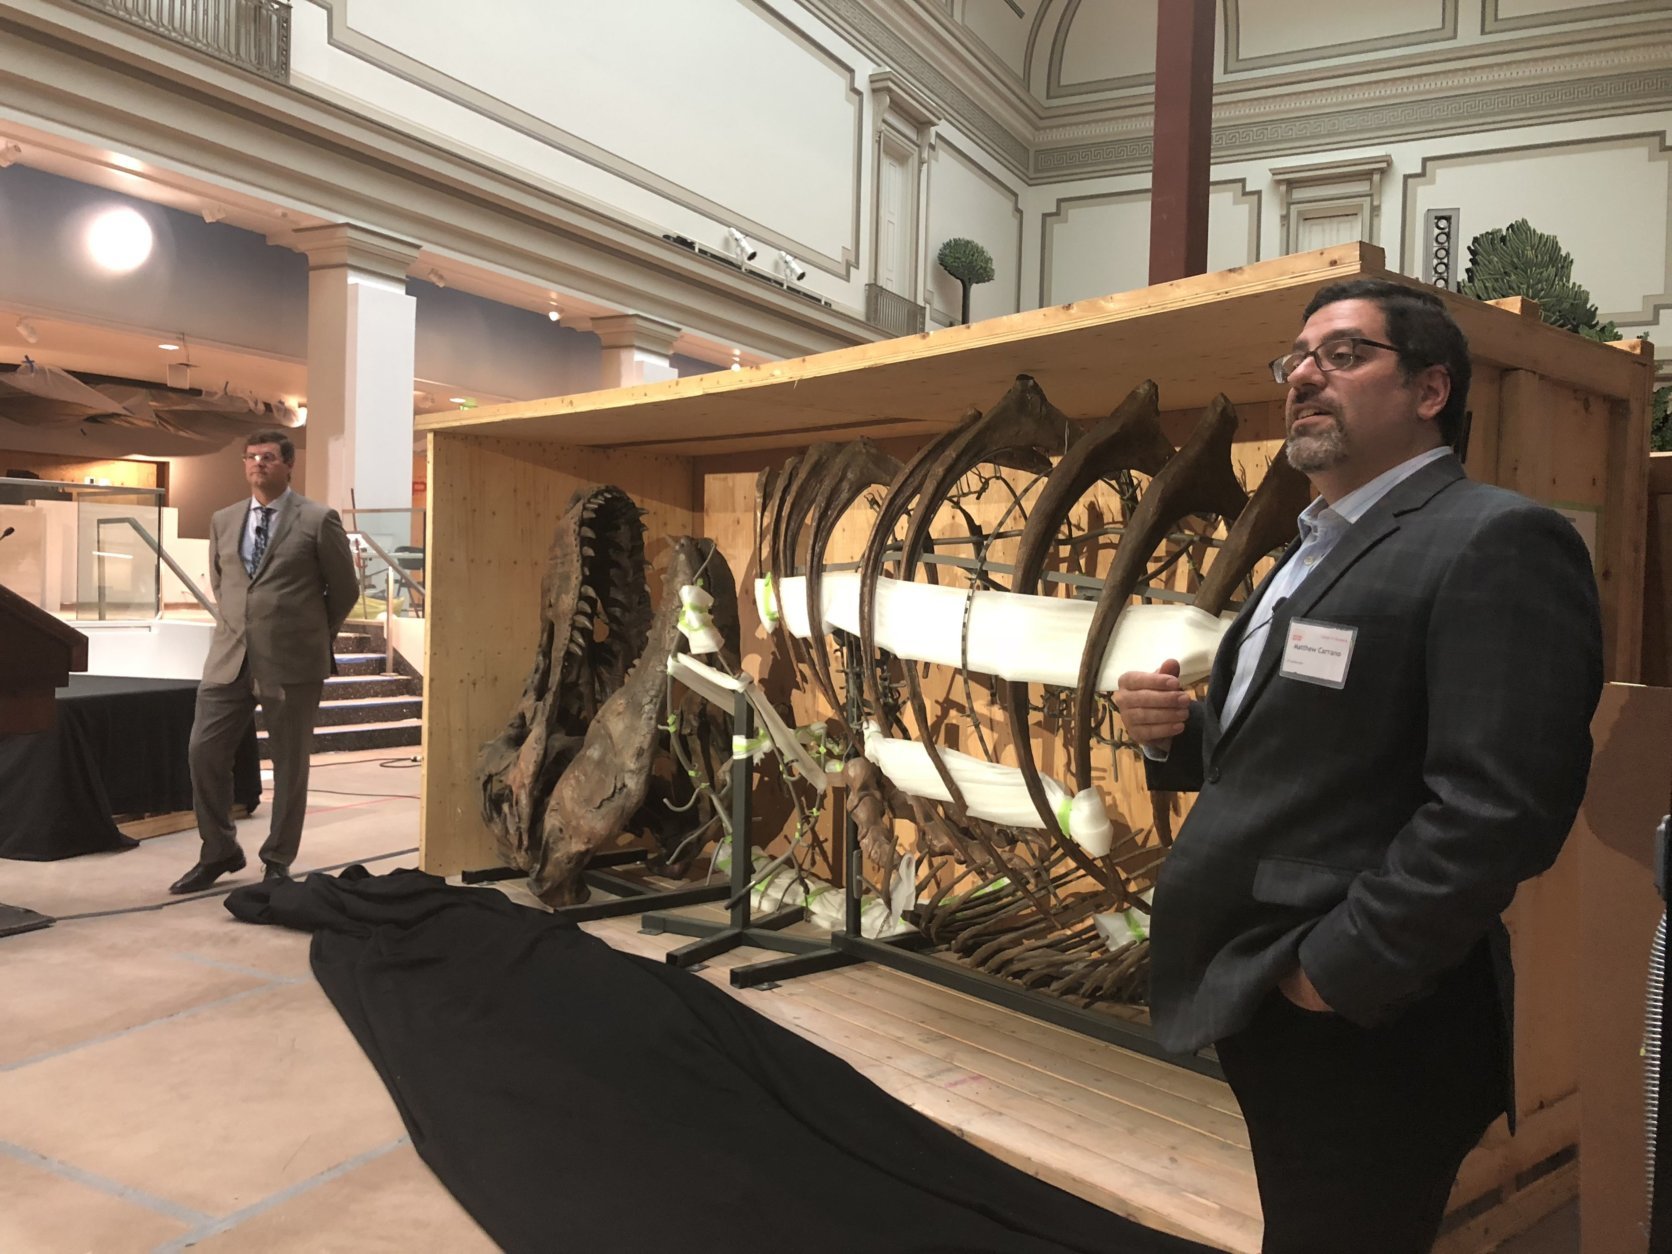 From left to right: Kirk Johnson, director of the National Museum of Natural History, and Matthew T. Carrano, curator of Dinosauria, standing in the new Dinosaur Hall, named Deep Time, next to a crate holding the skeleton of one of it’s newest additions, a Tyrannosaurus rex. (WTOP/Melissa Howell)